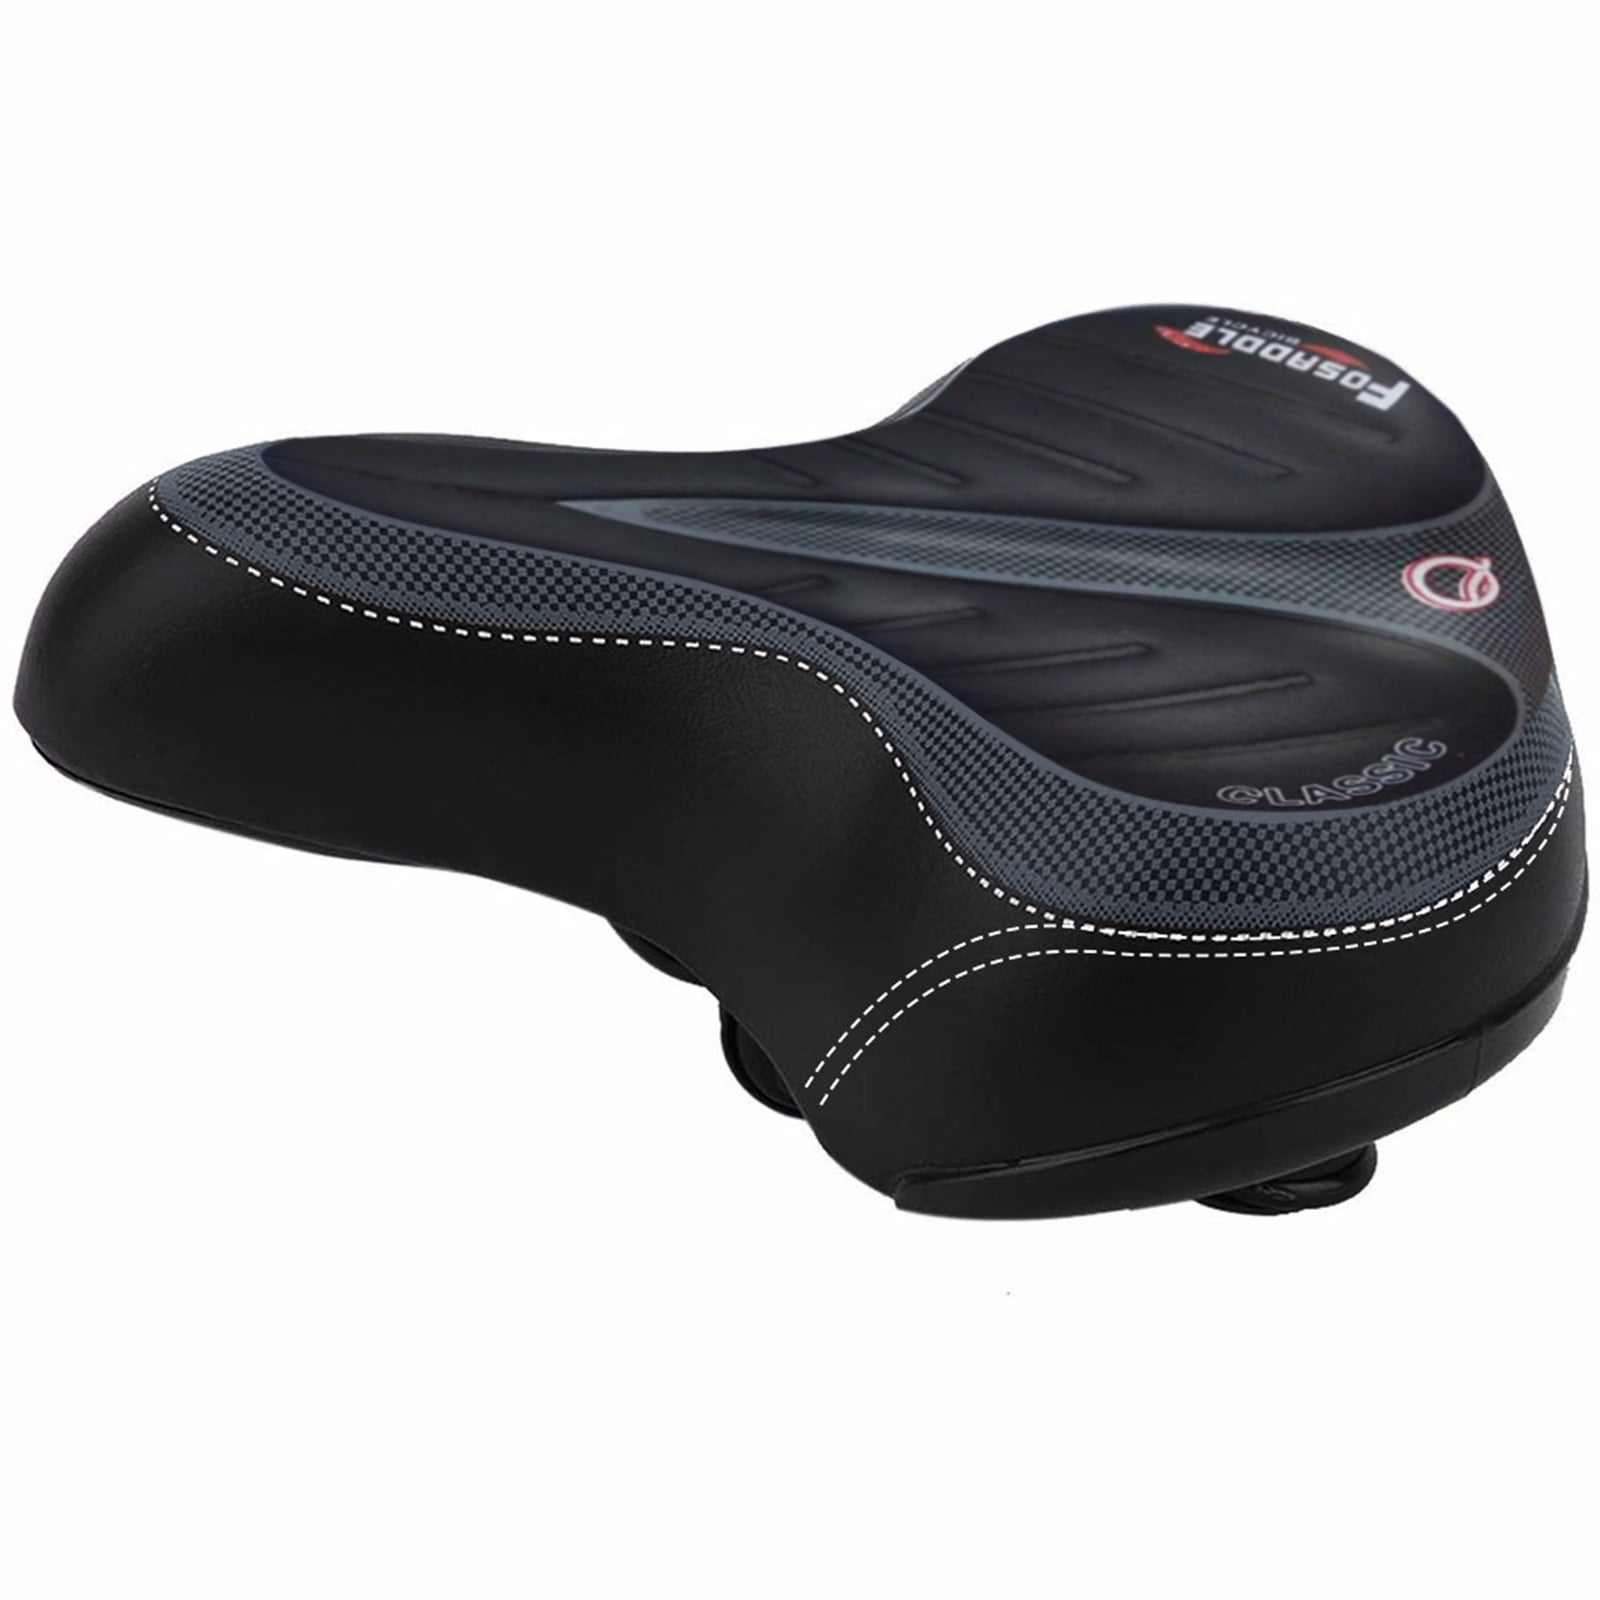 Details about   Comfort Wide Cruiser Extra Pad Big Bum Bike Bicycle Gel Soft Seat Saddle US 